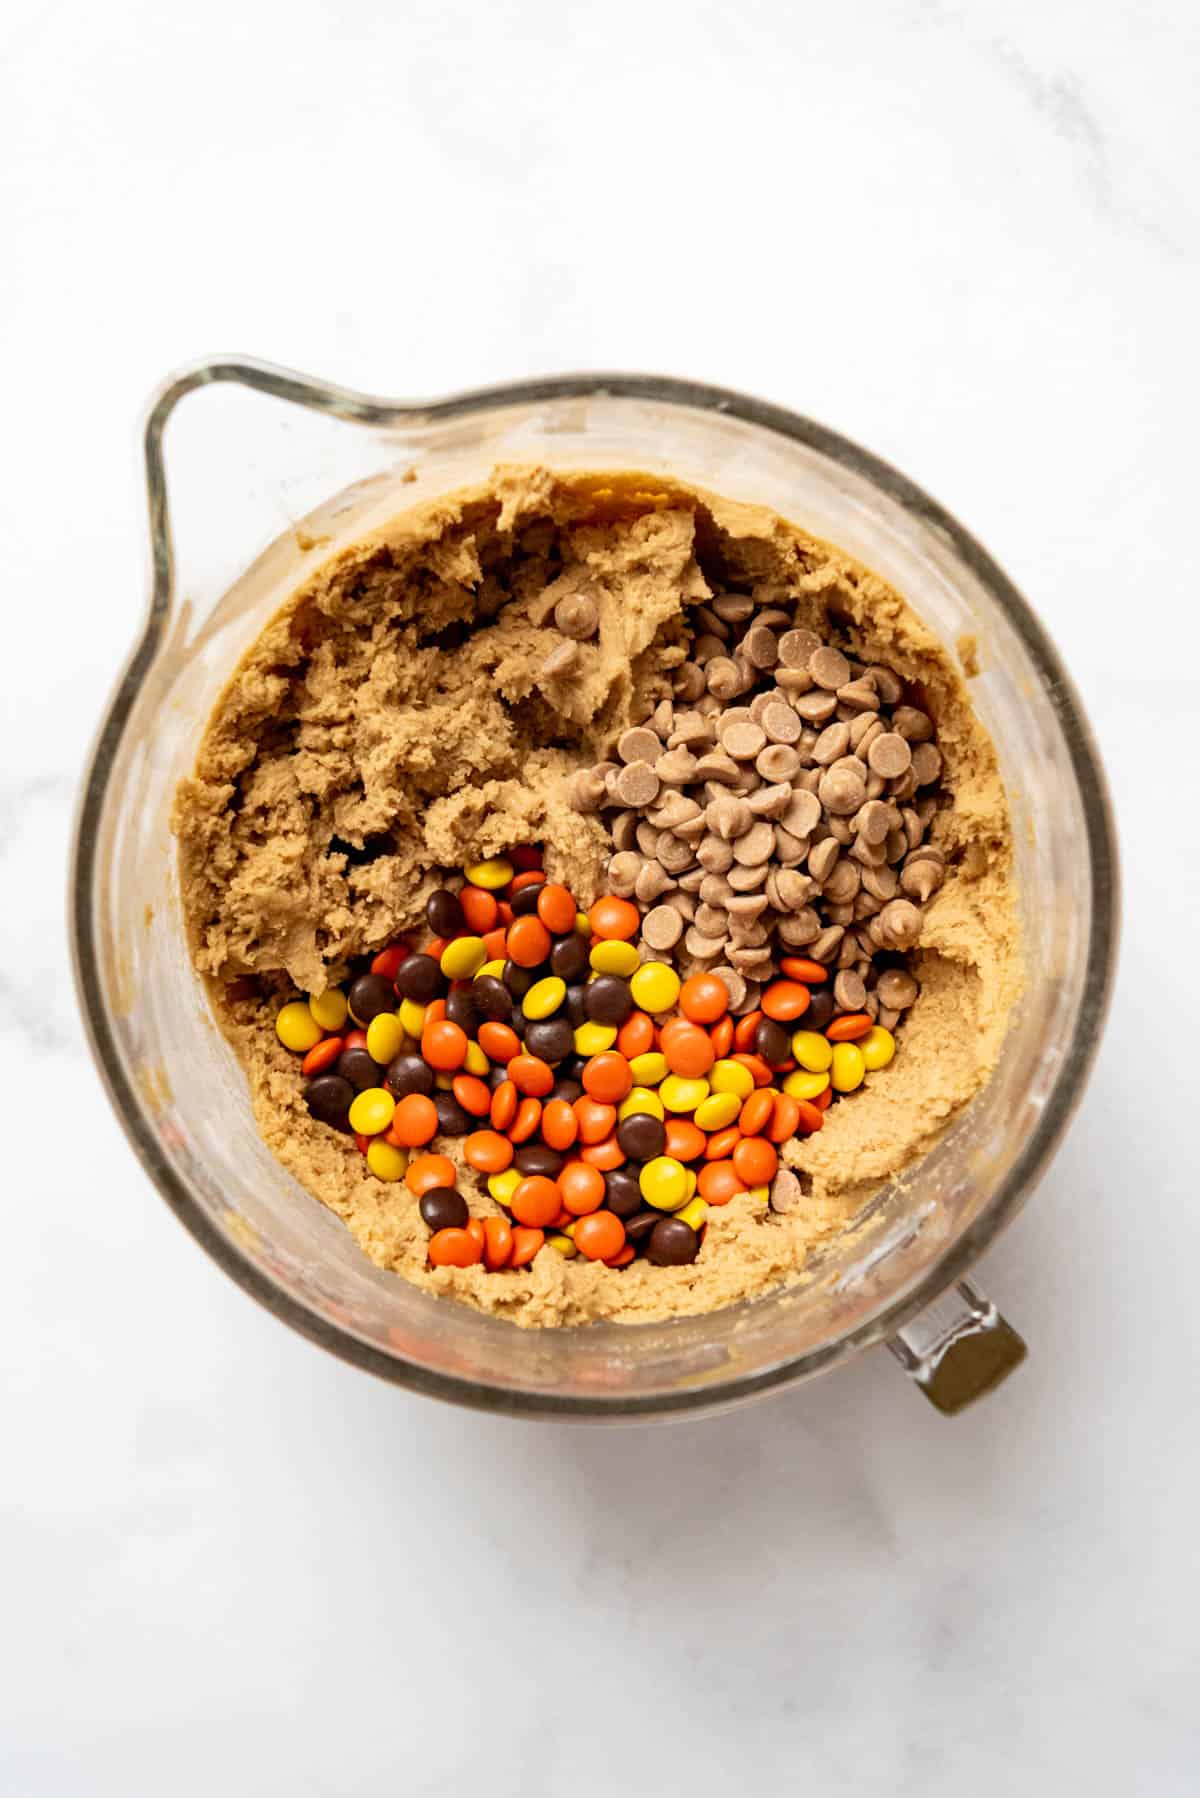 Adding peanut butter chips and Reese's Pieces candy to peanut butter cookie dough in a large glass mixing bowl.